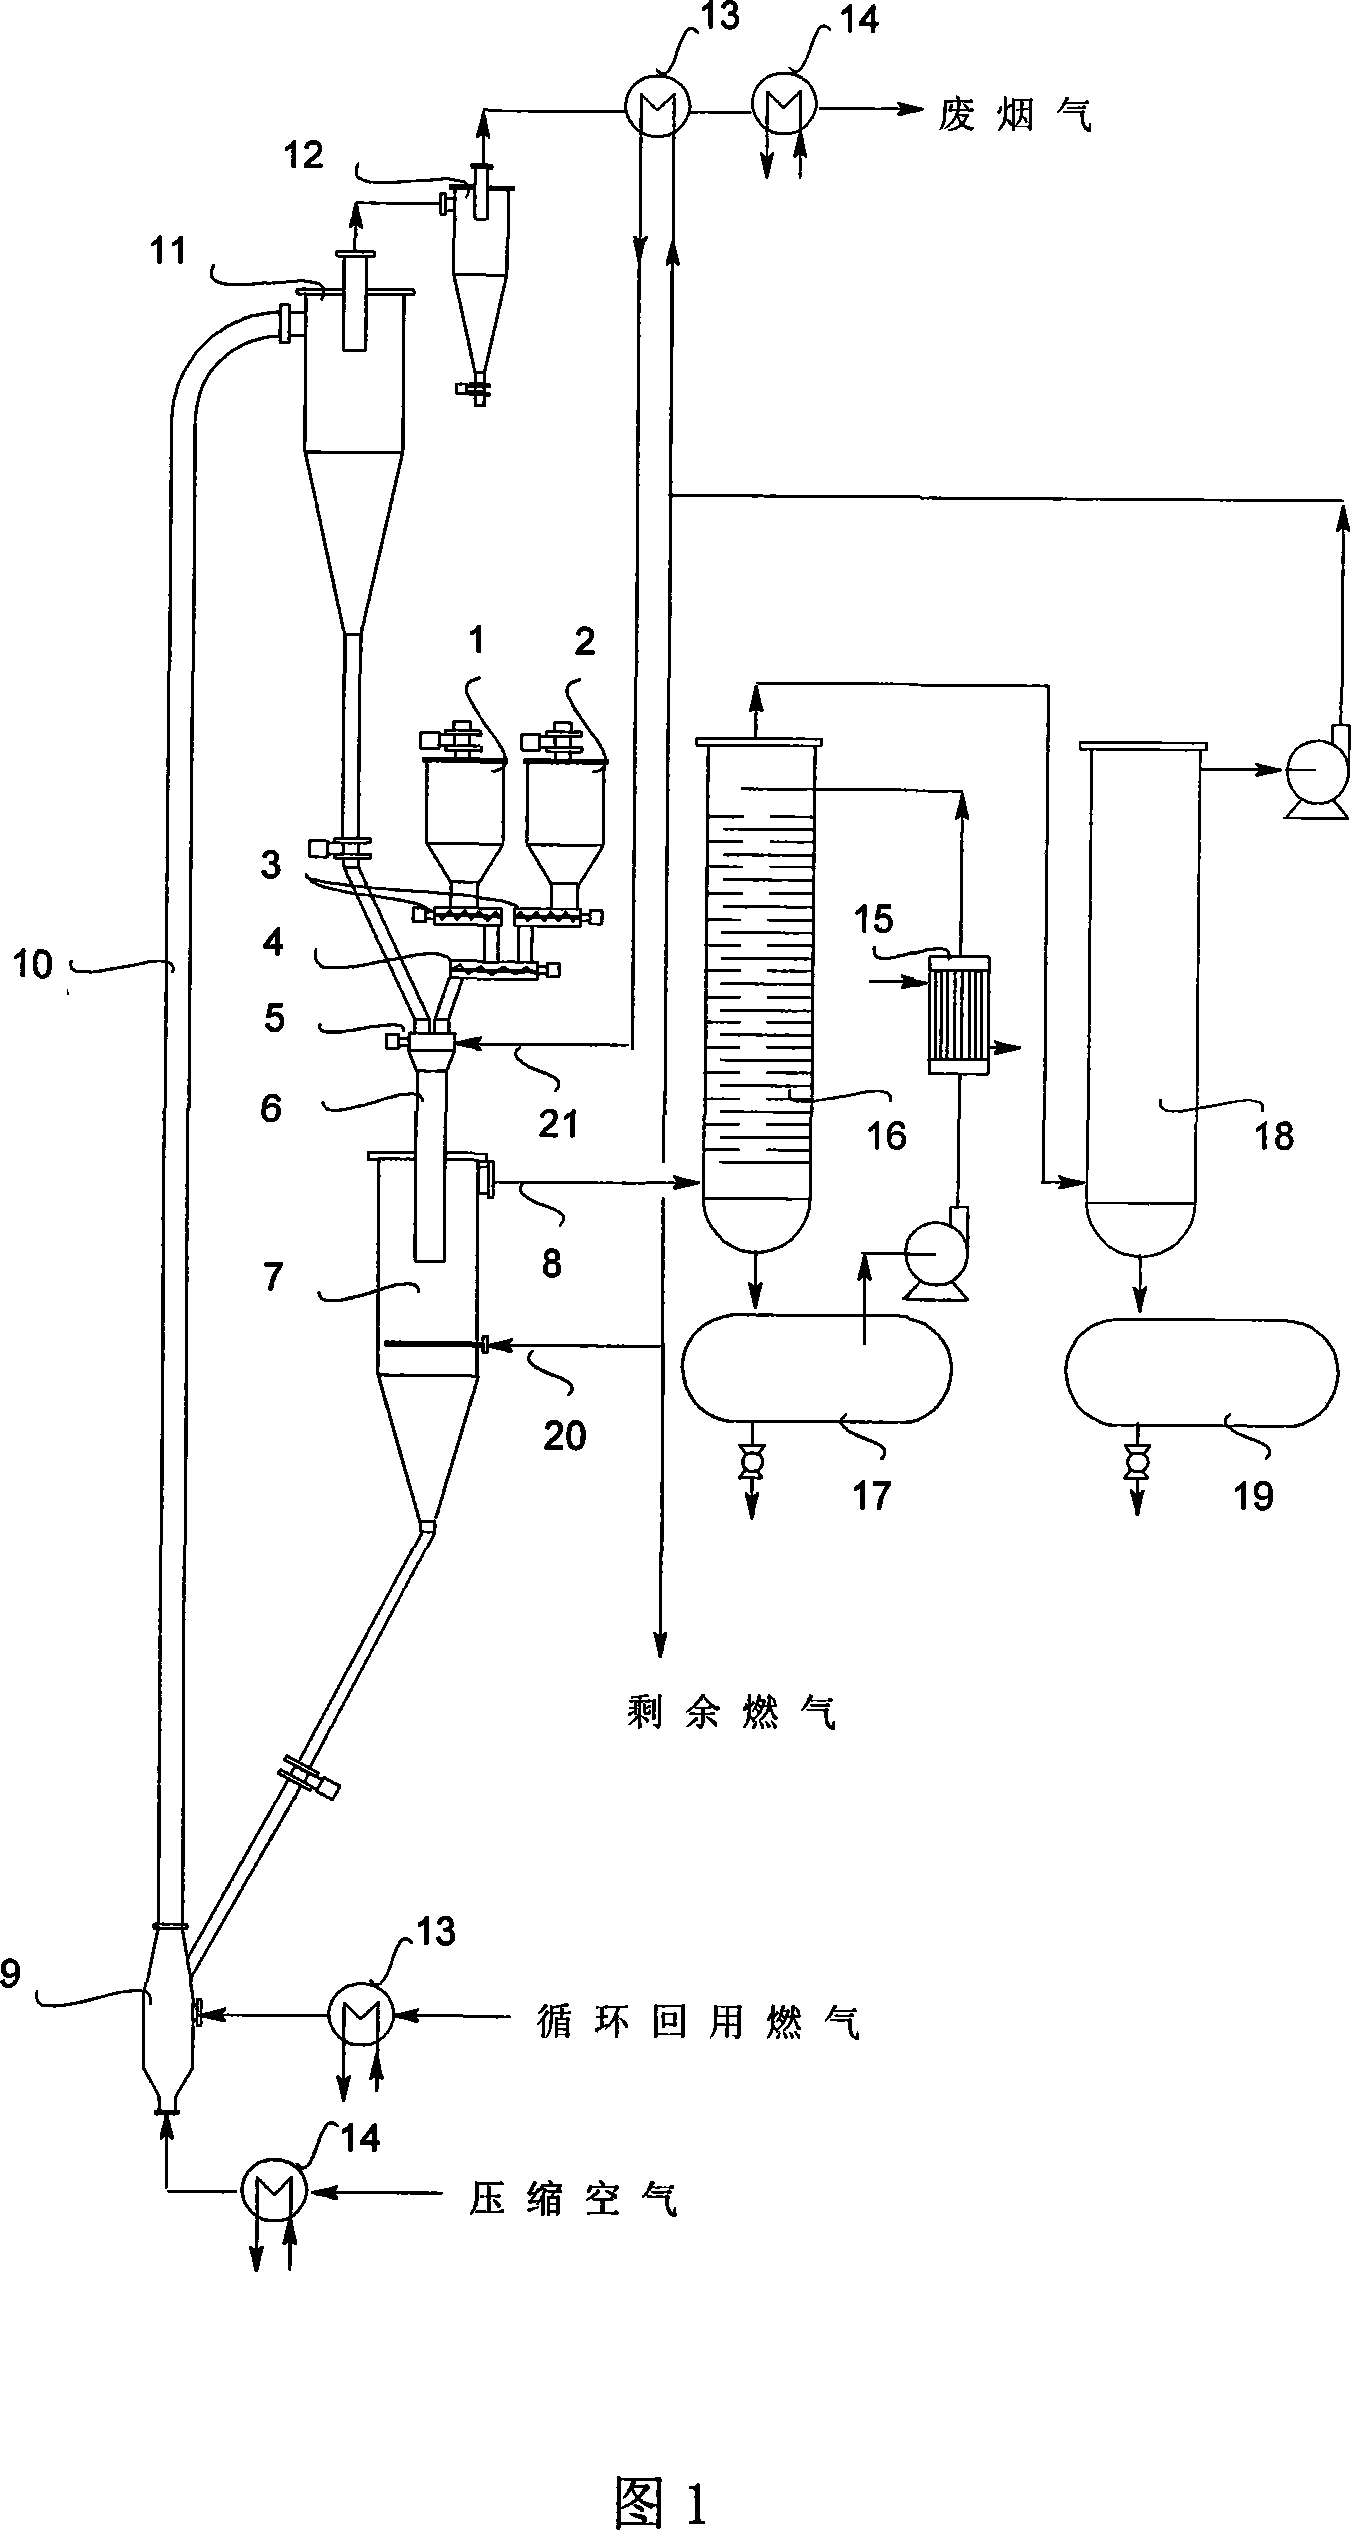 Method for manufacturing wet fuel by rapid common thermal decomposition of biomass and coal